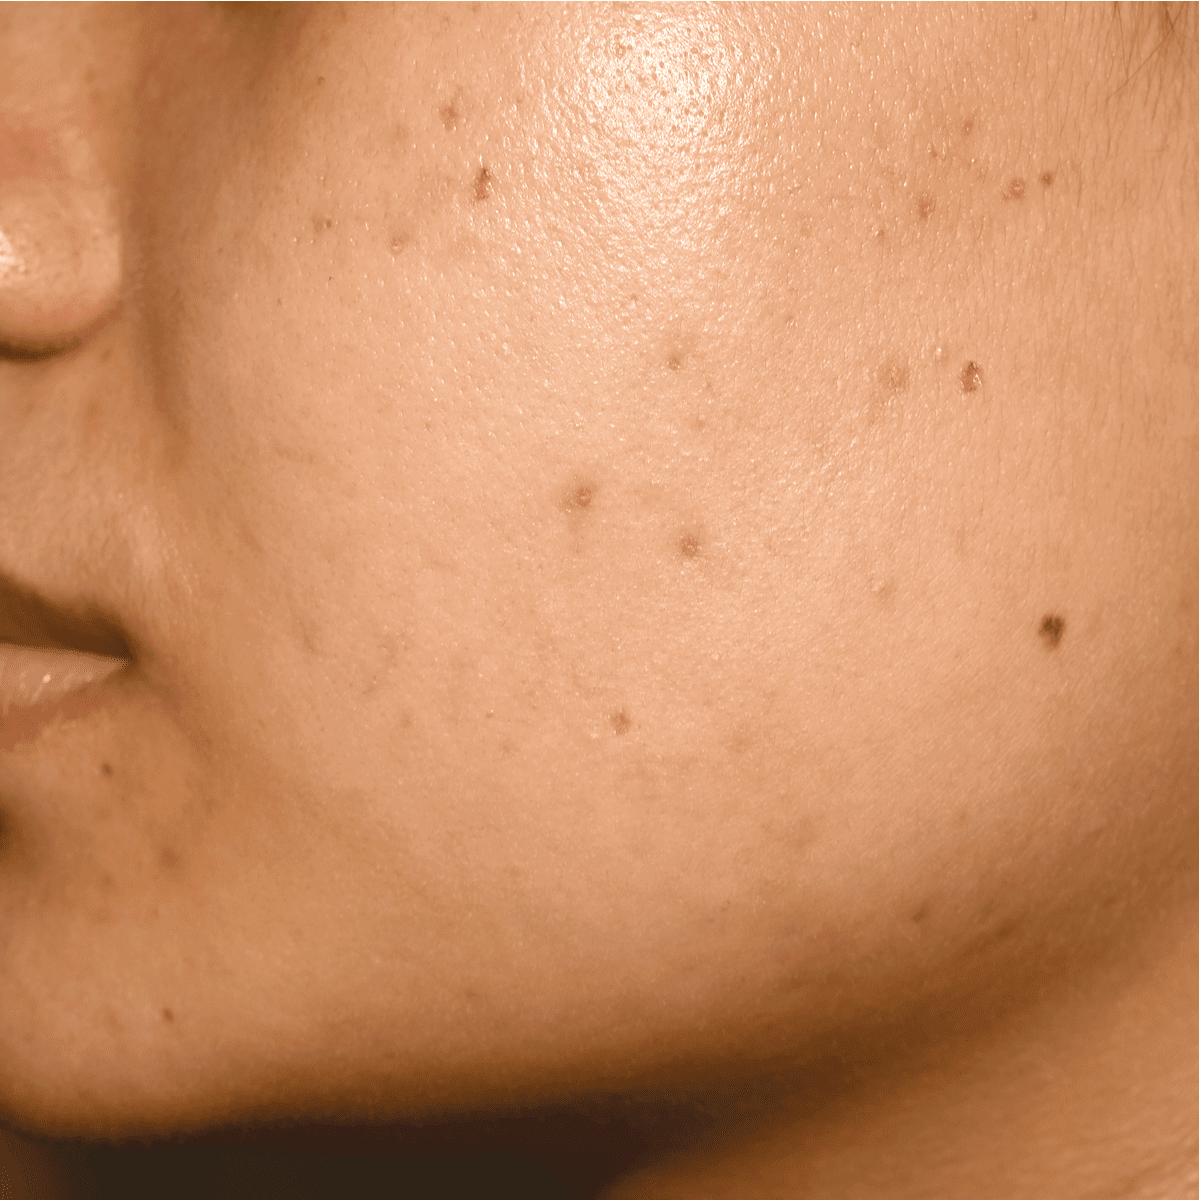 hyperpigmentation image of a girl